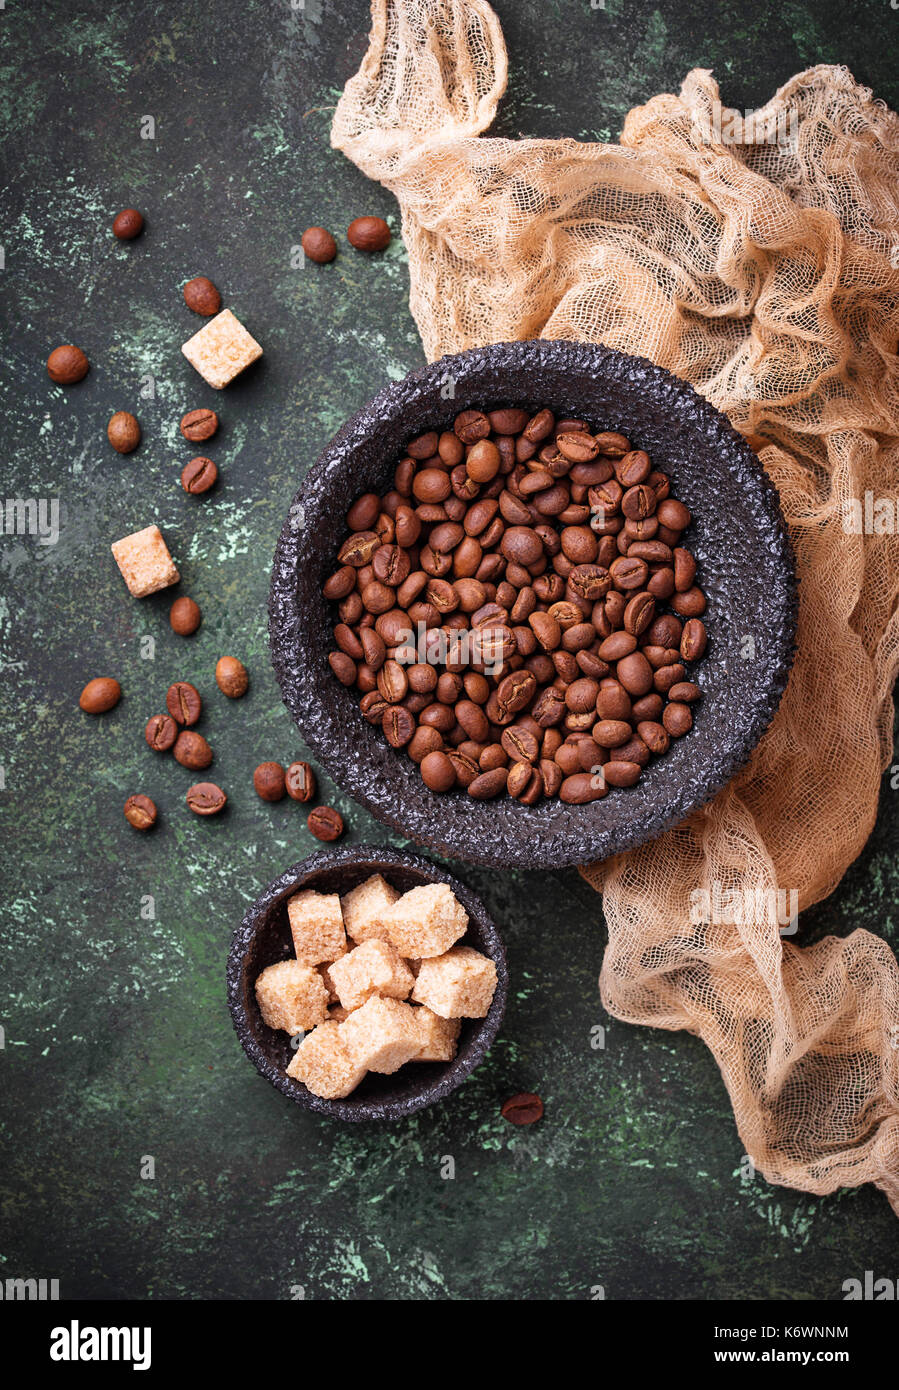 Coffee beans and brown sugar.  Stock Photo